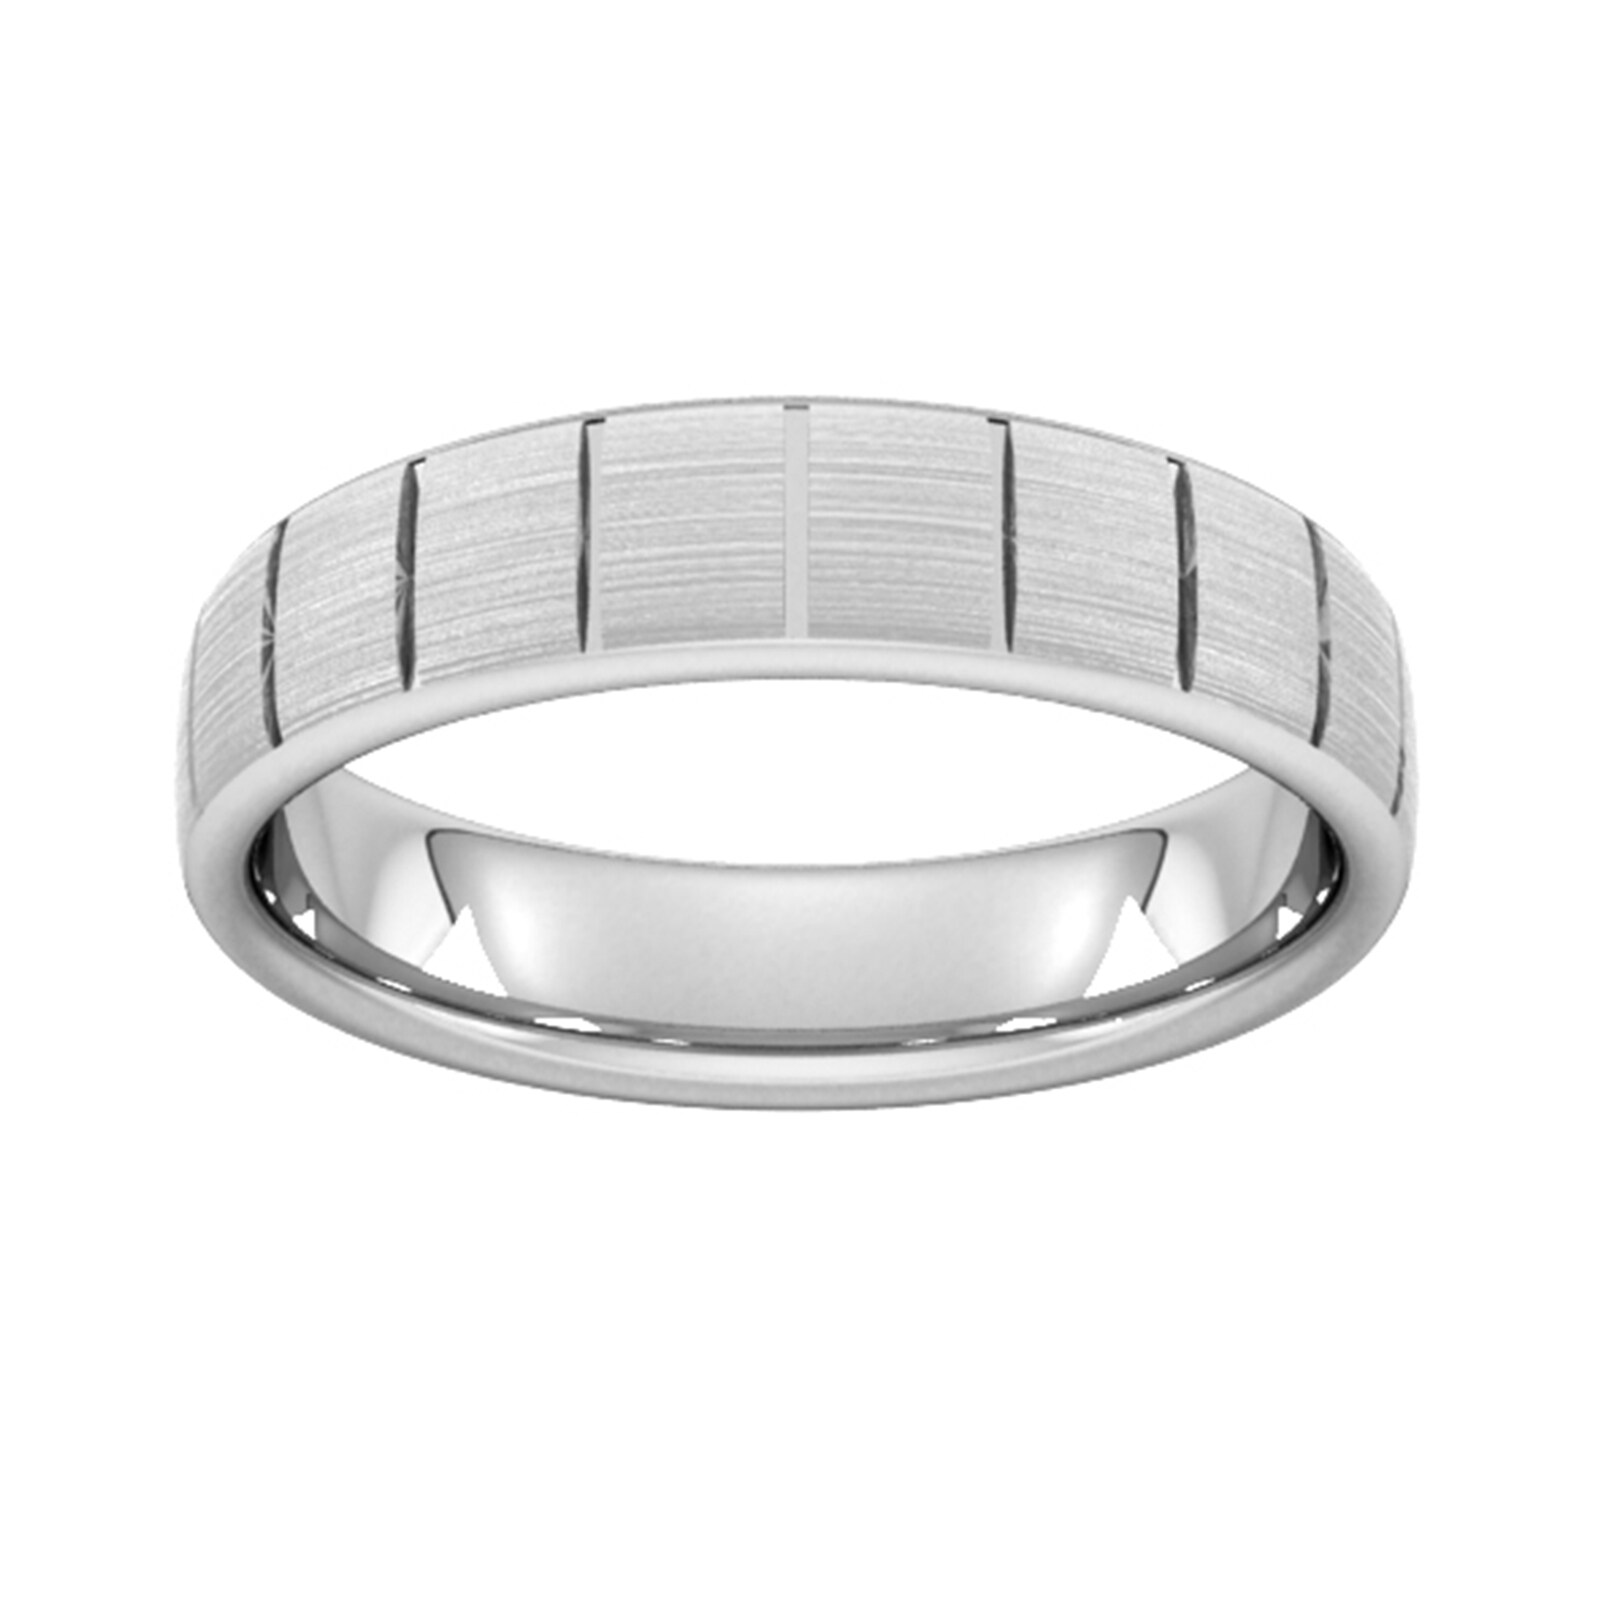 4mm D Shape Heavy Vertical Lines Wedding Ring In 950 Palladium - Ring Size L